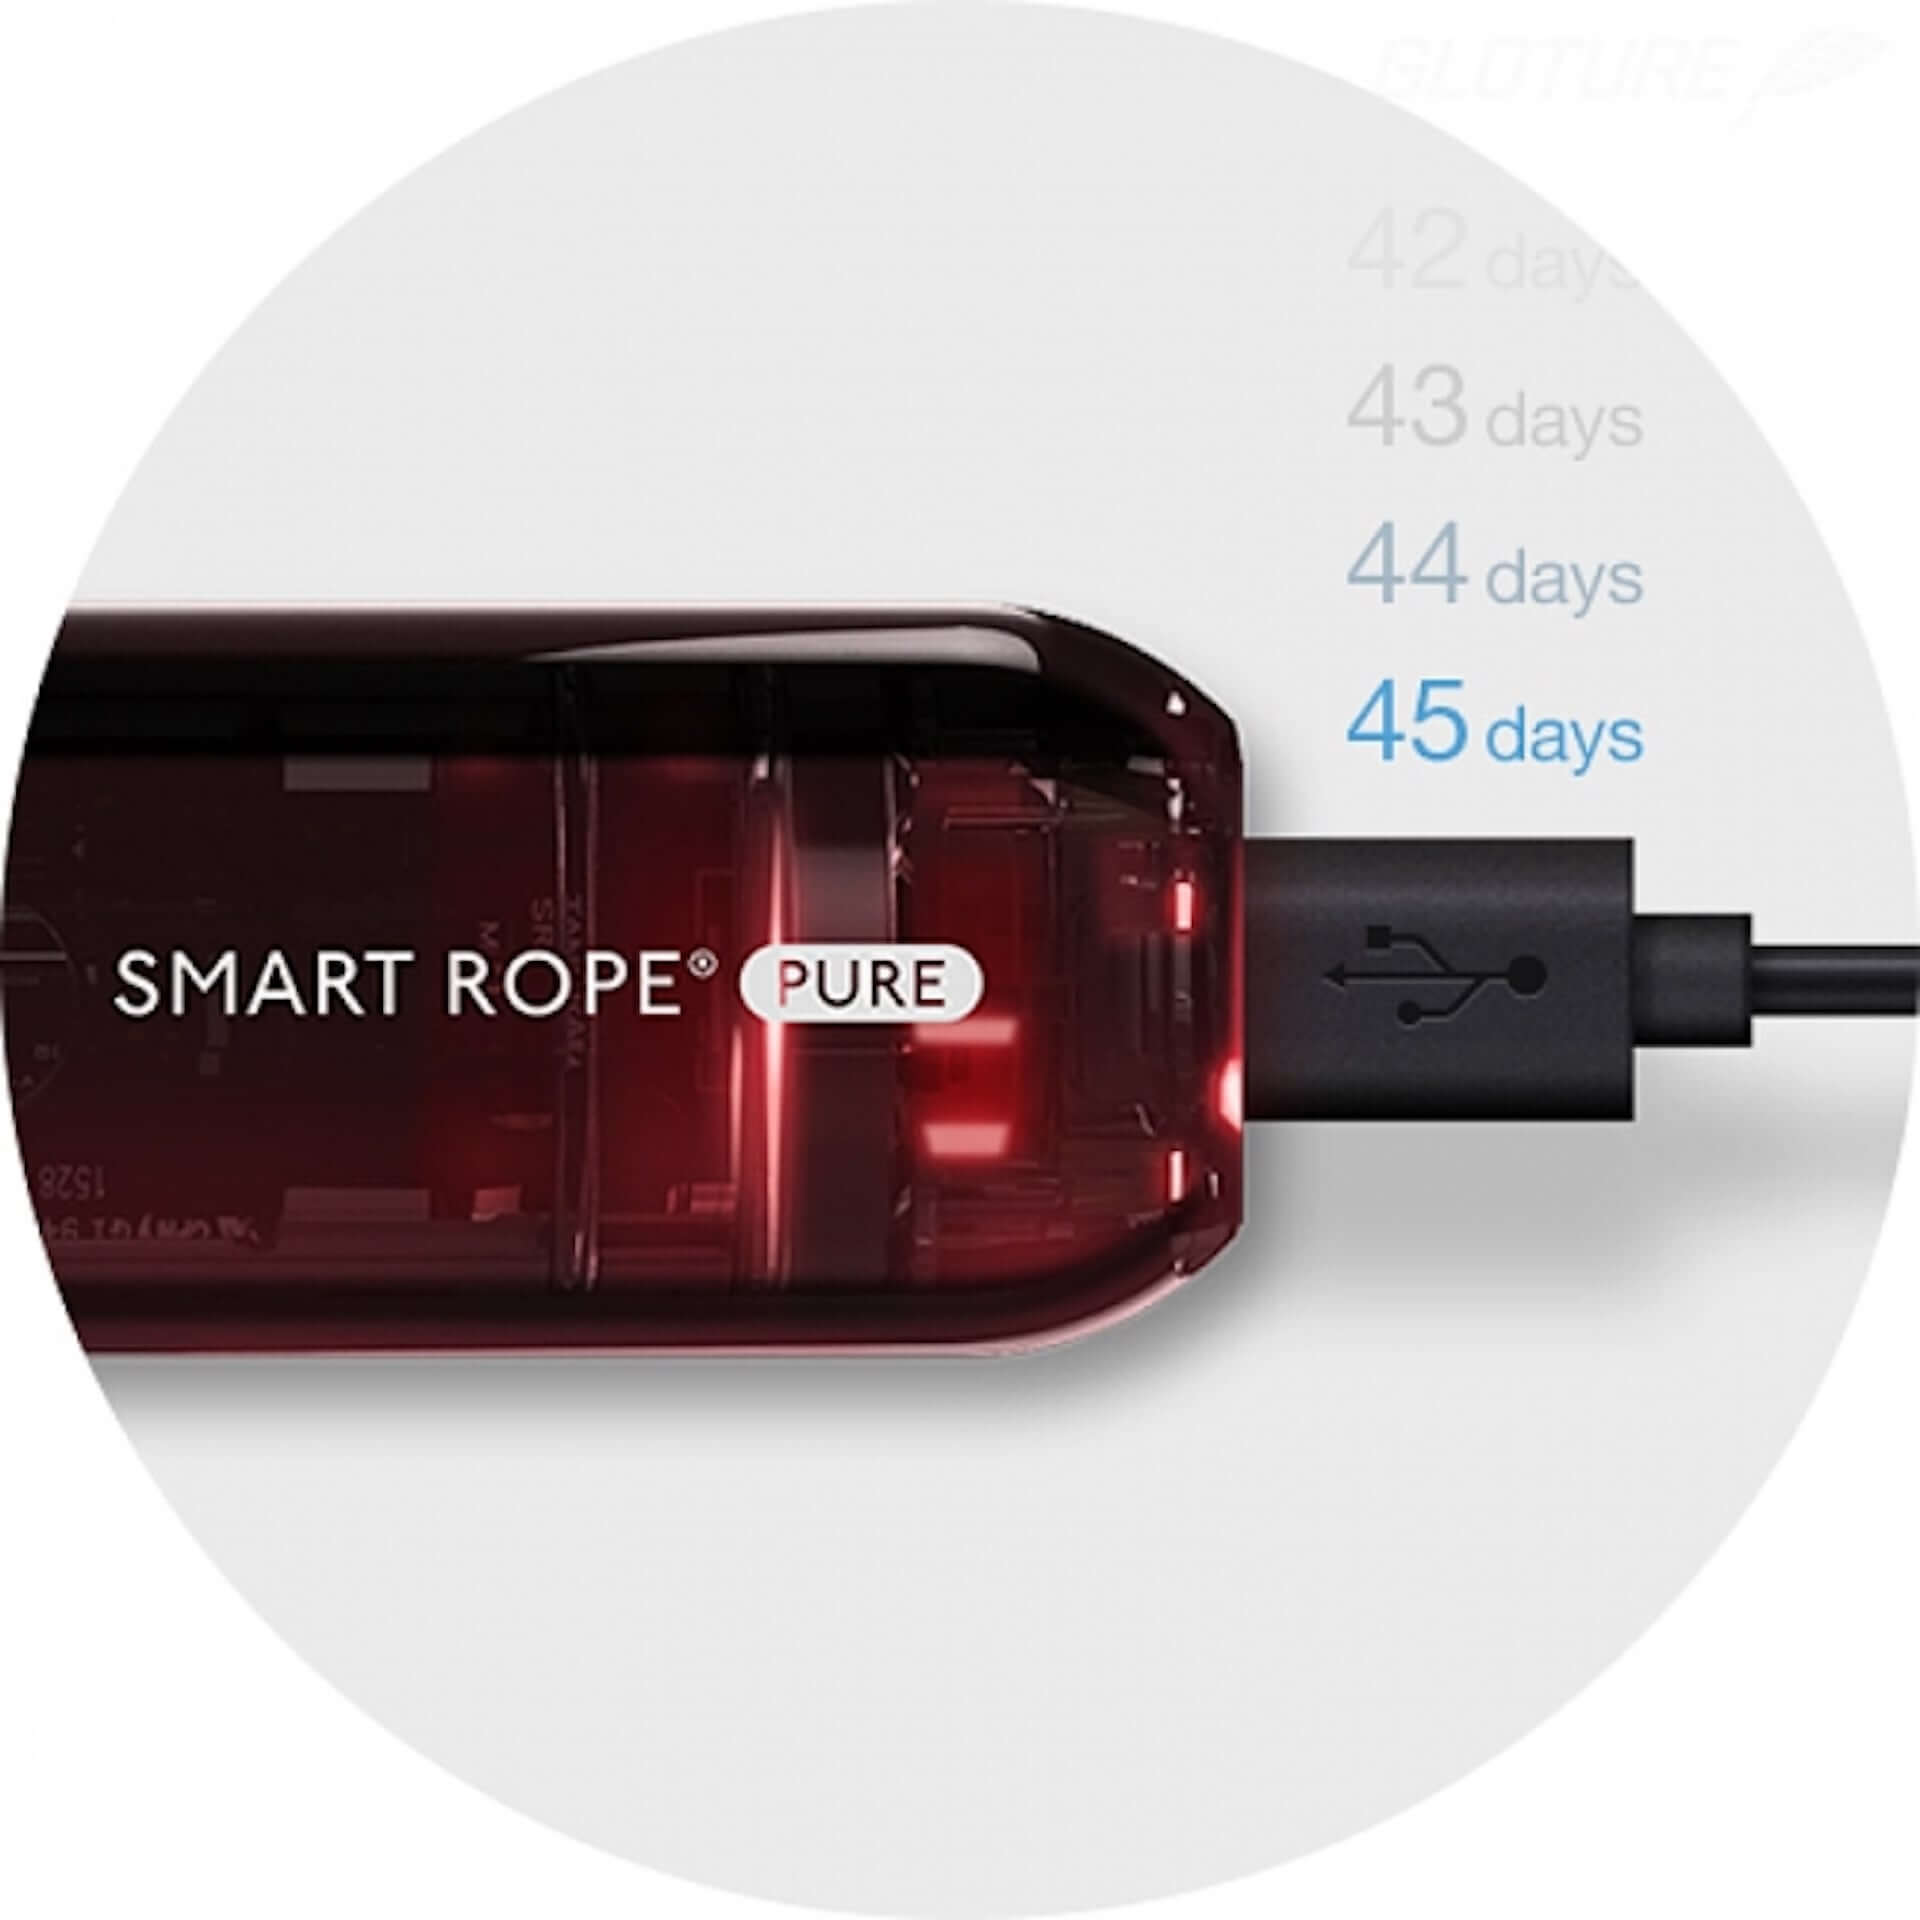 Smart Rope PURE